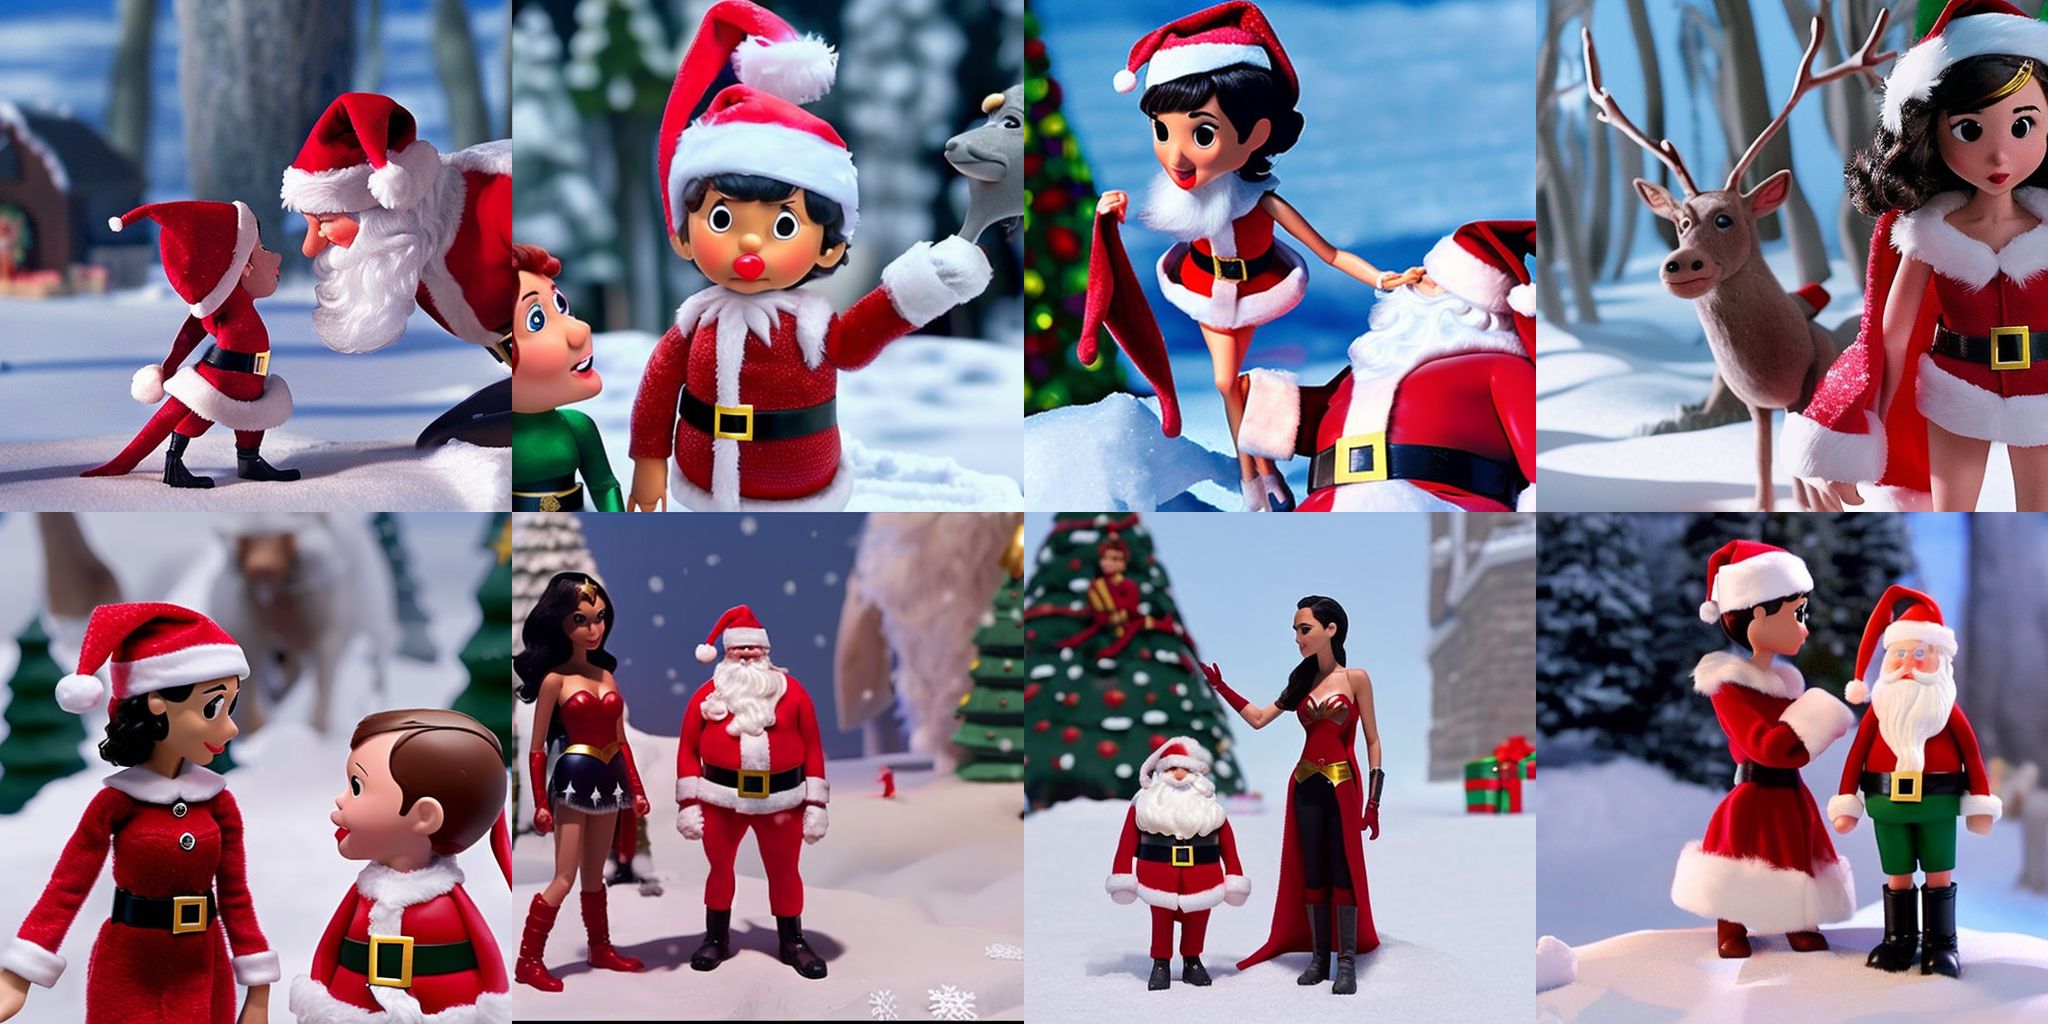 grid-0168-2731336261-A_Gal_Gadot_in_the_snow_with_Santa_ClaymationXmas,_very_detailed,_clean,_high_quality,_sharp_image.jpg